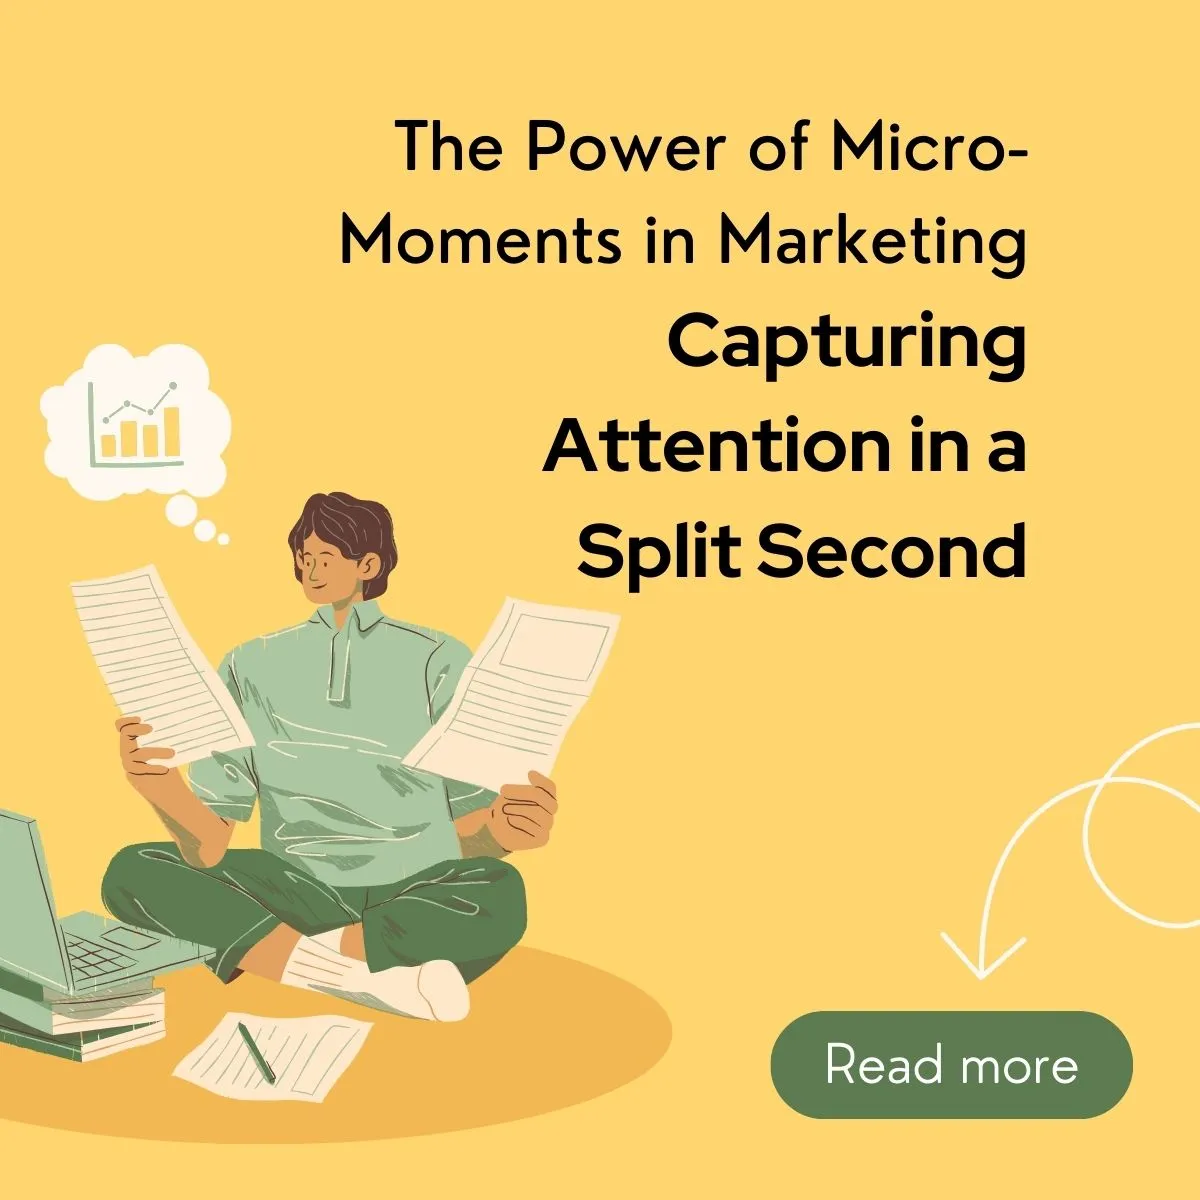 The Power of Micro-Moments in Marketing: Capturing Attention in a Split Second